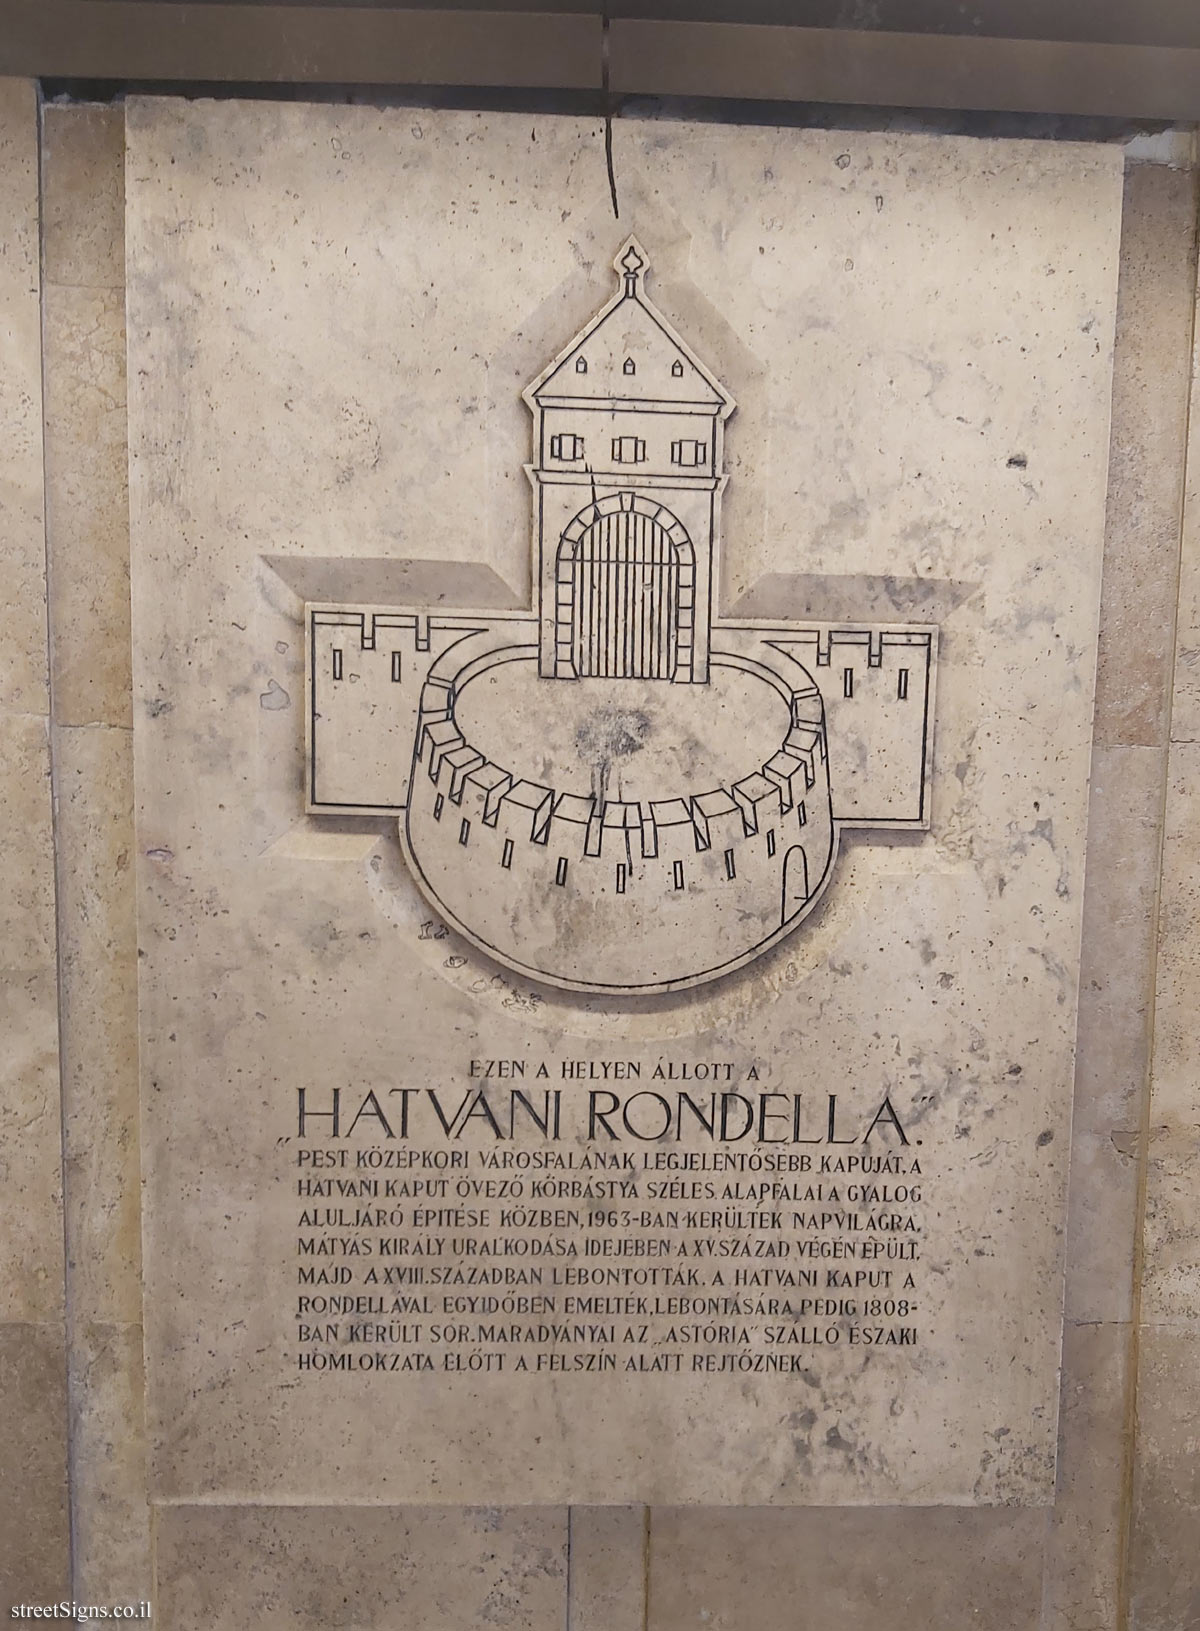 Budapest - A plaque depicting the Hatvan gate from the medieval Budapest wall